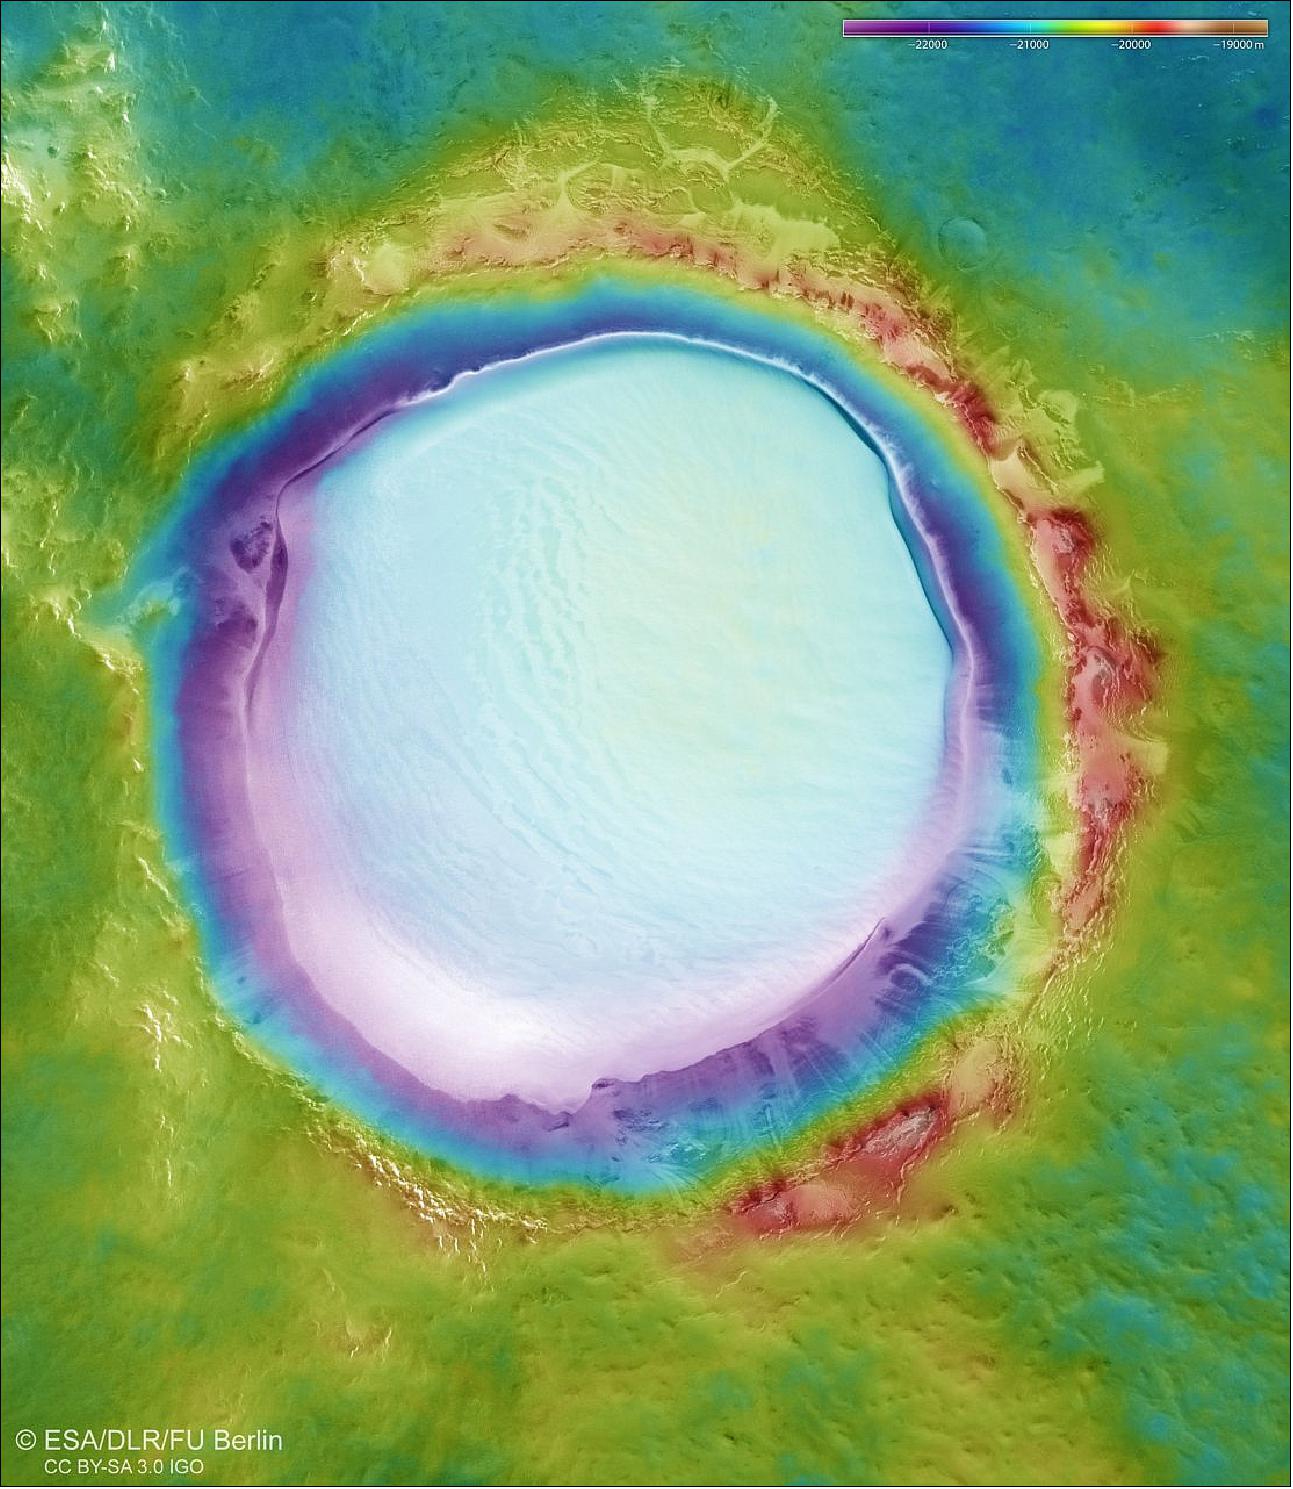 Figure 62: Topography of the Korolev crater. This color-coded topographic view shows the relative heights of the terrain in and around the Korolev crater, an ice-filled crater in the northern lowlands of Mars. Lower parts of the surface are shown in blues and purples, while higher-altitude regions show up in whites, browns, and reds, as indicated on the scale to the top right. The crater’s thick deposit of ice can be seen at the center of the frame. This view is based on a digital terrain model of the region, from which the topography of the landscape can be derived. It comprises data obtained by the HRSC on Mars Express over orbits 18042 (captured on 4 April 2018), 5726, 5692, 5654, and 1412.It covers a region centered at 165º E, 73º N, and has a resolution of ~ 21 m/pixel (image credit: ESA/DLR/FU Berlin, CC BY-SA 3.0 IGO)